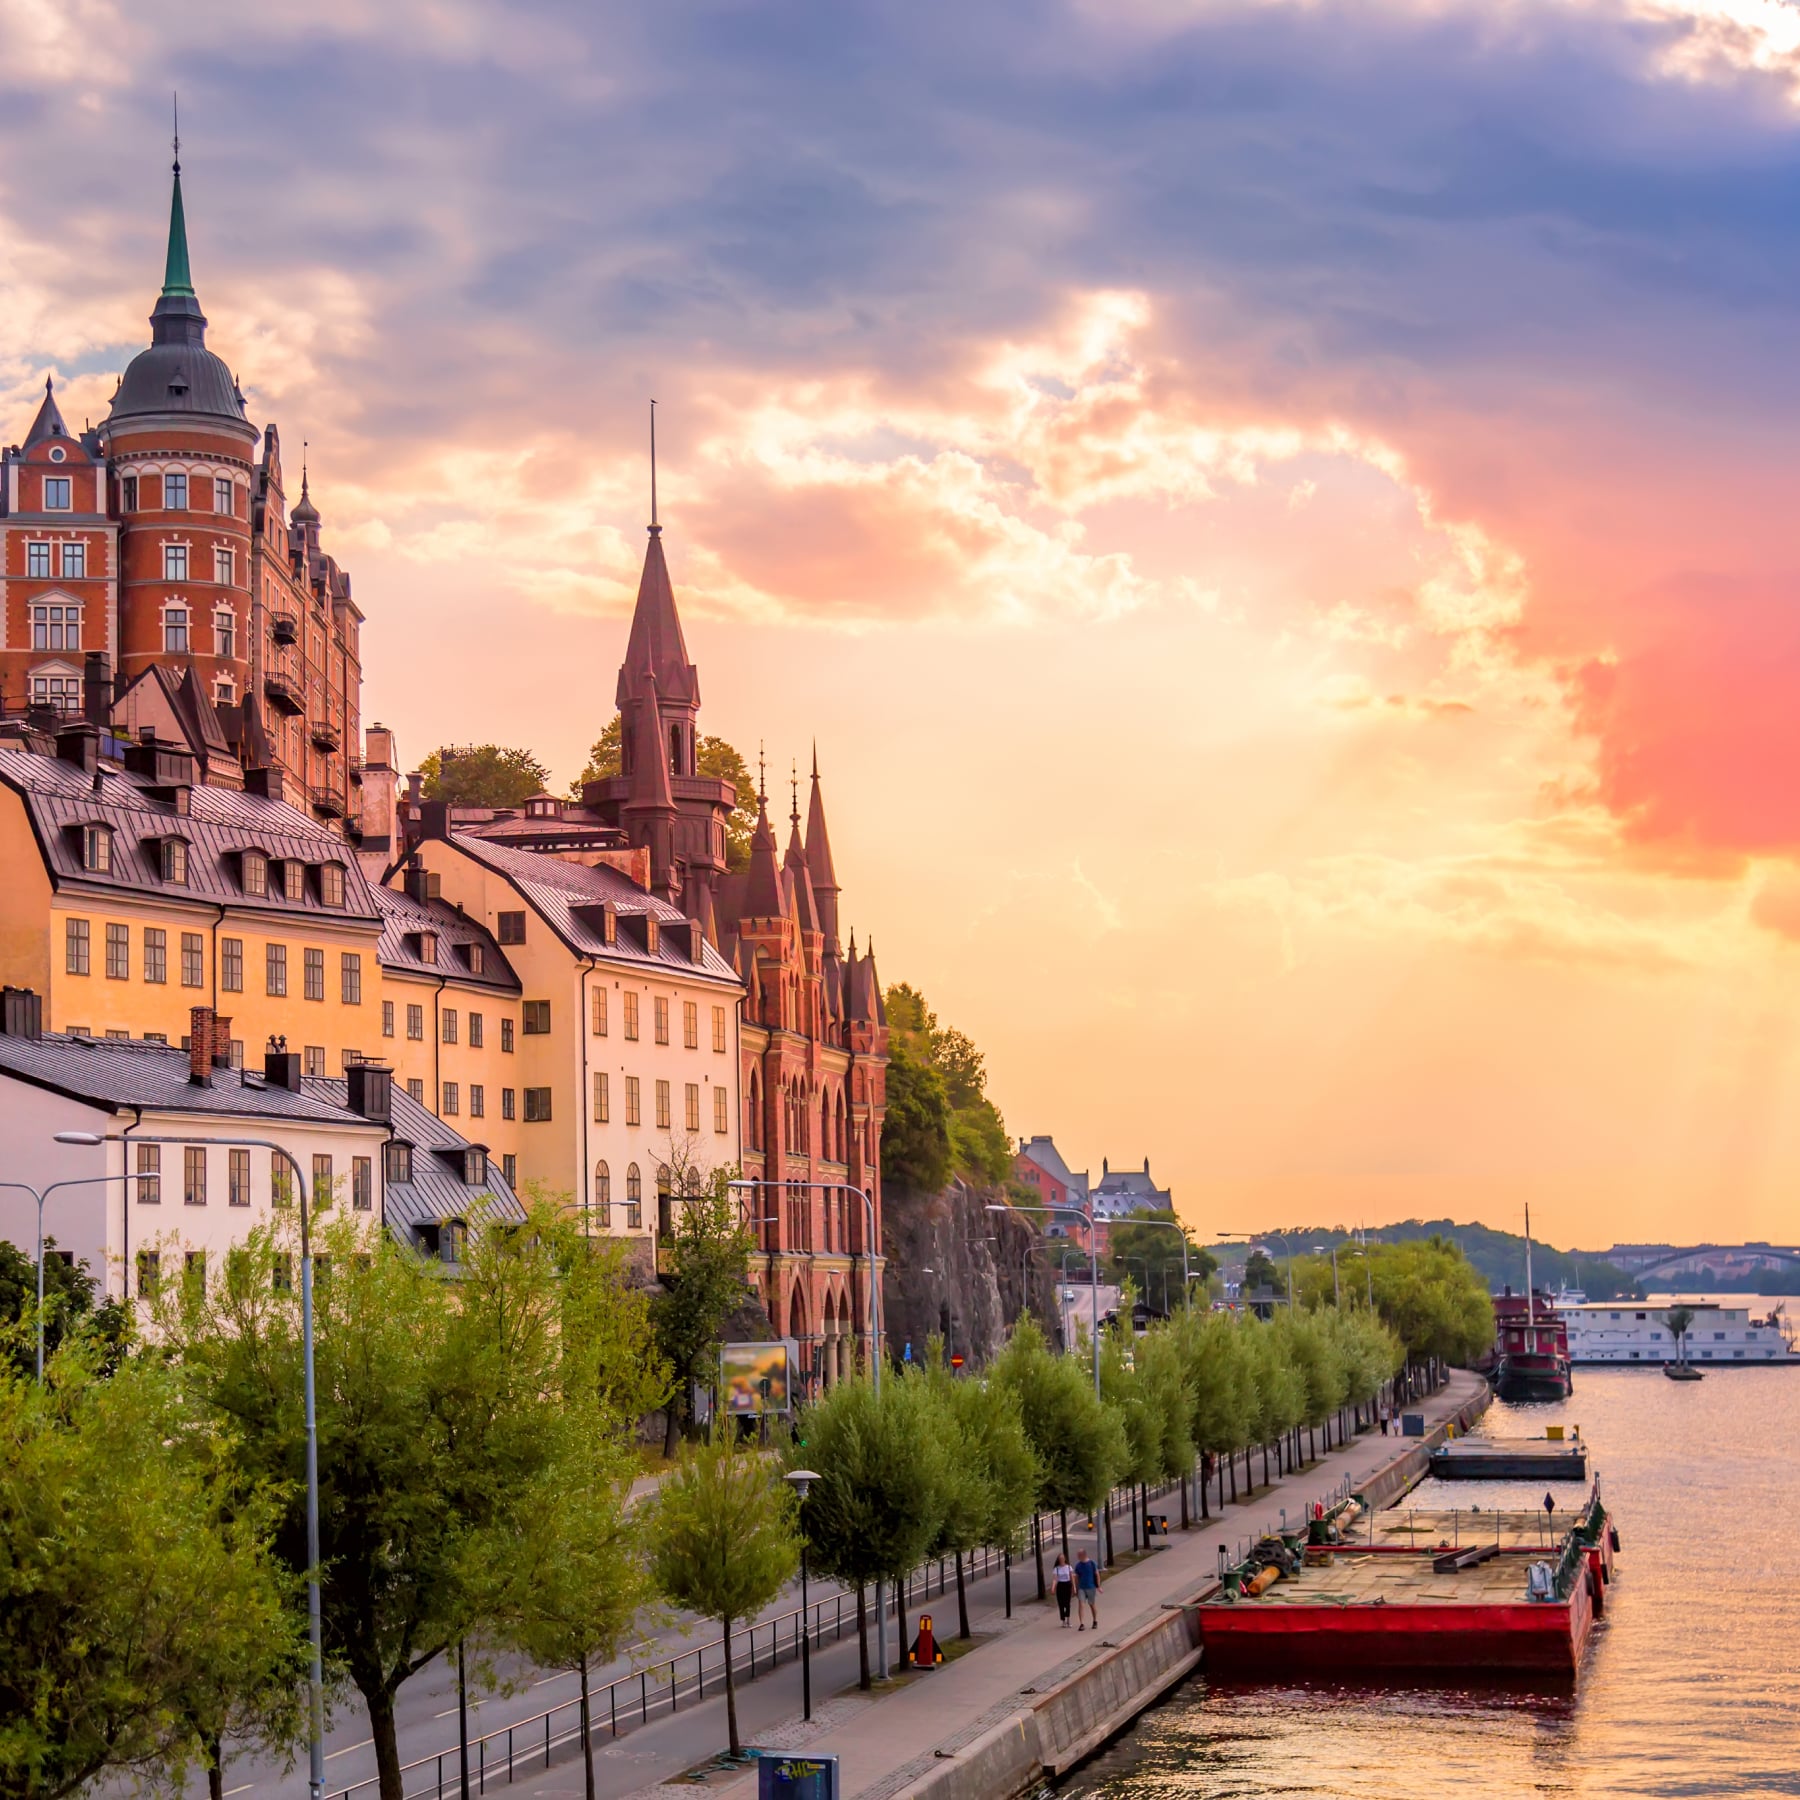 Stockholm is one of the best travel destinations in literature